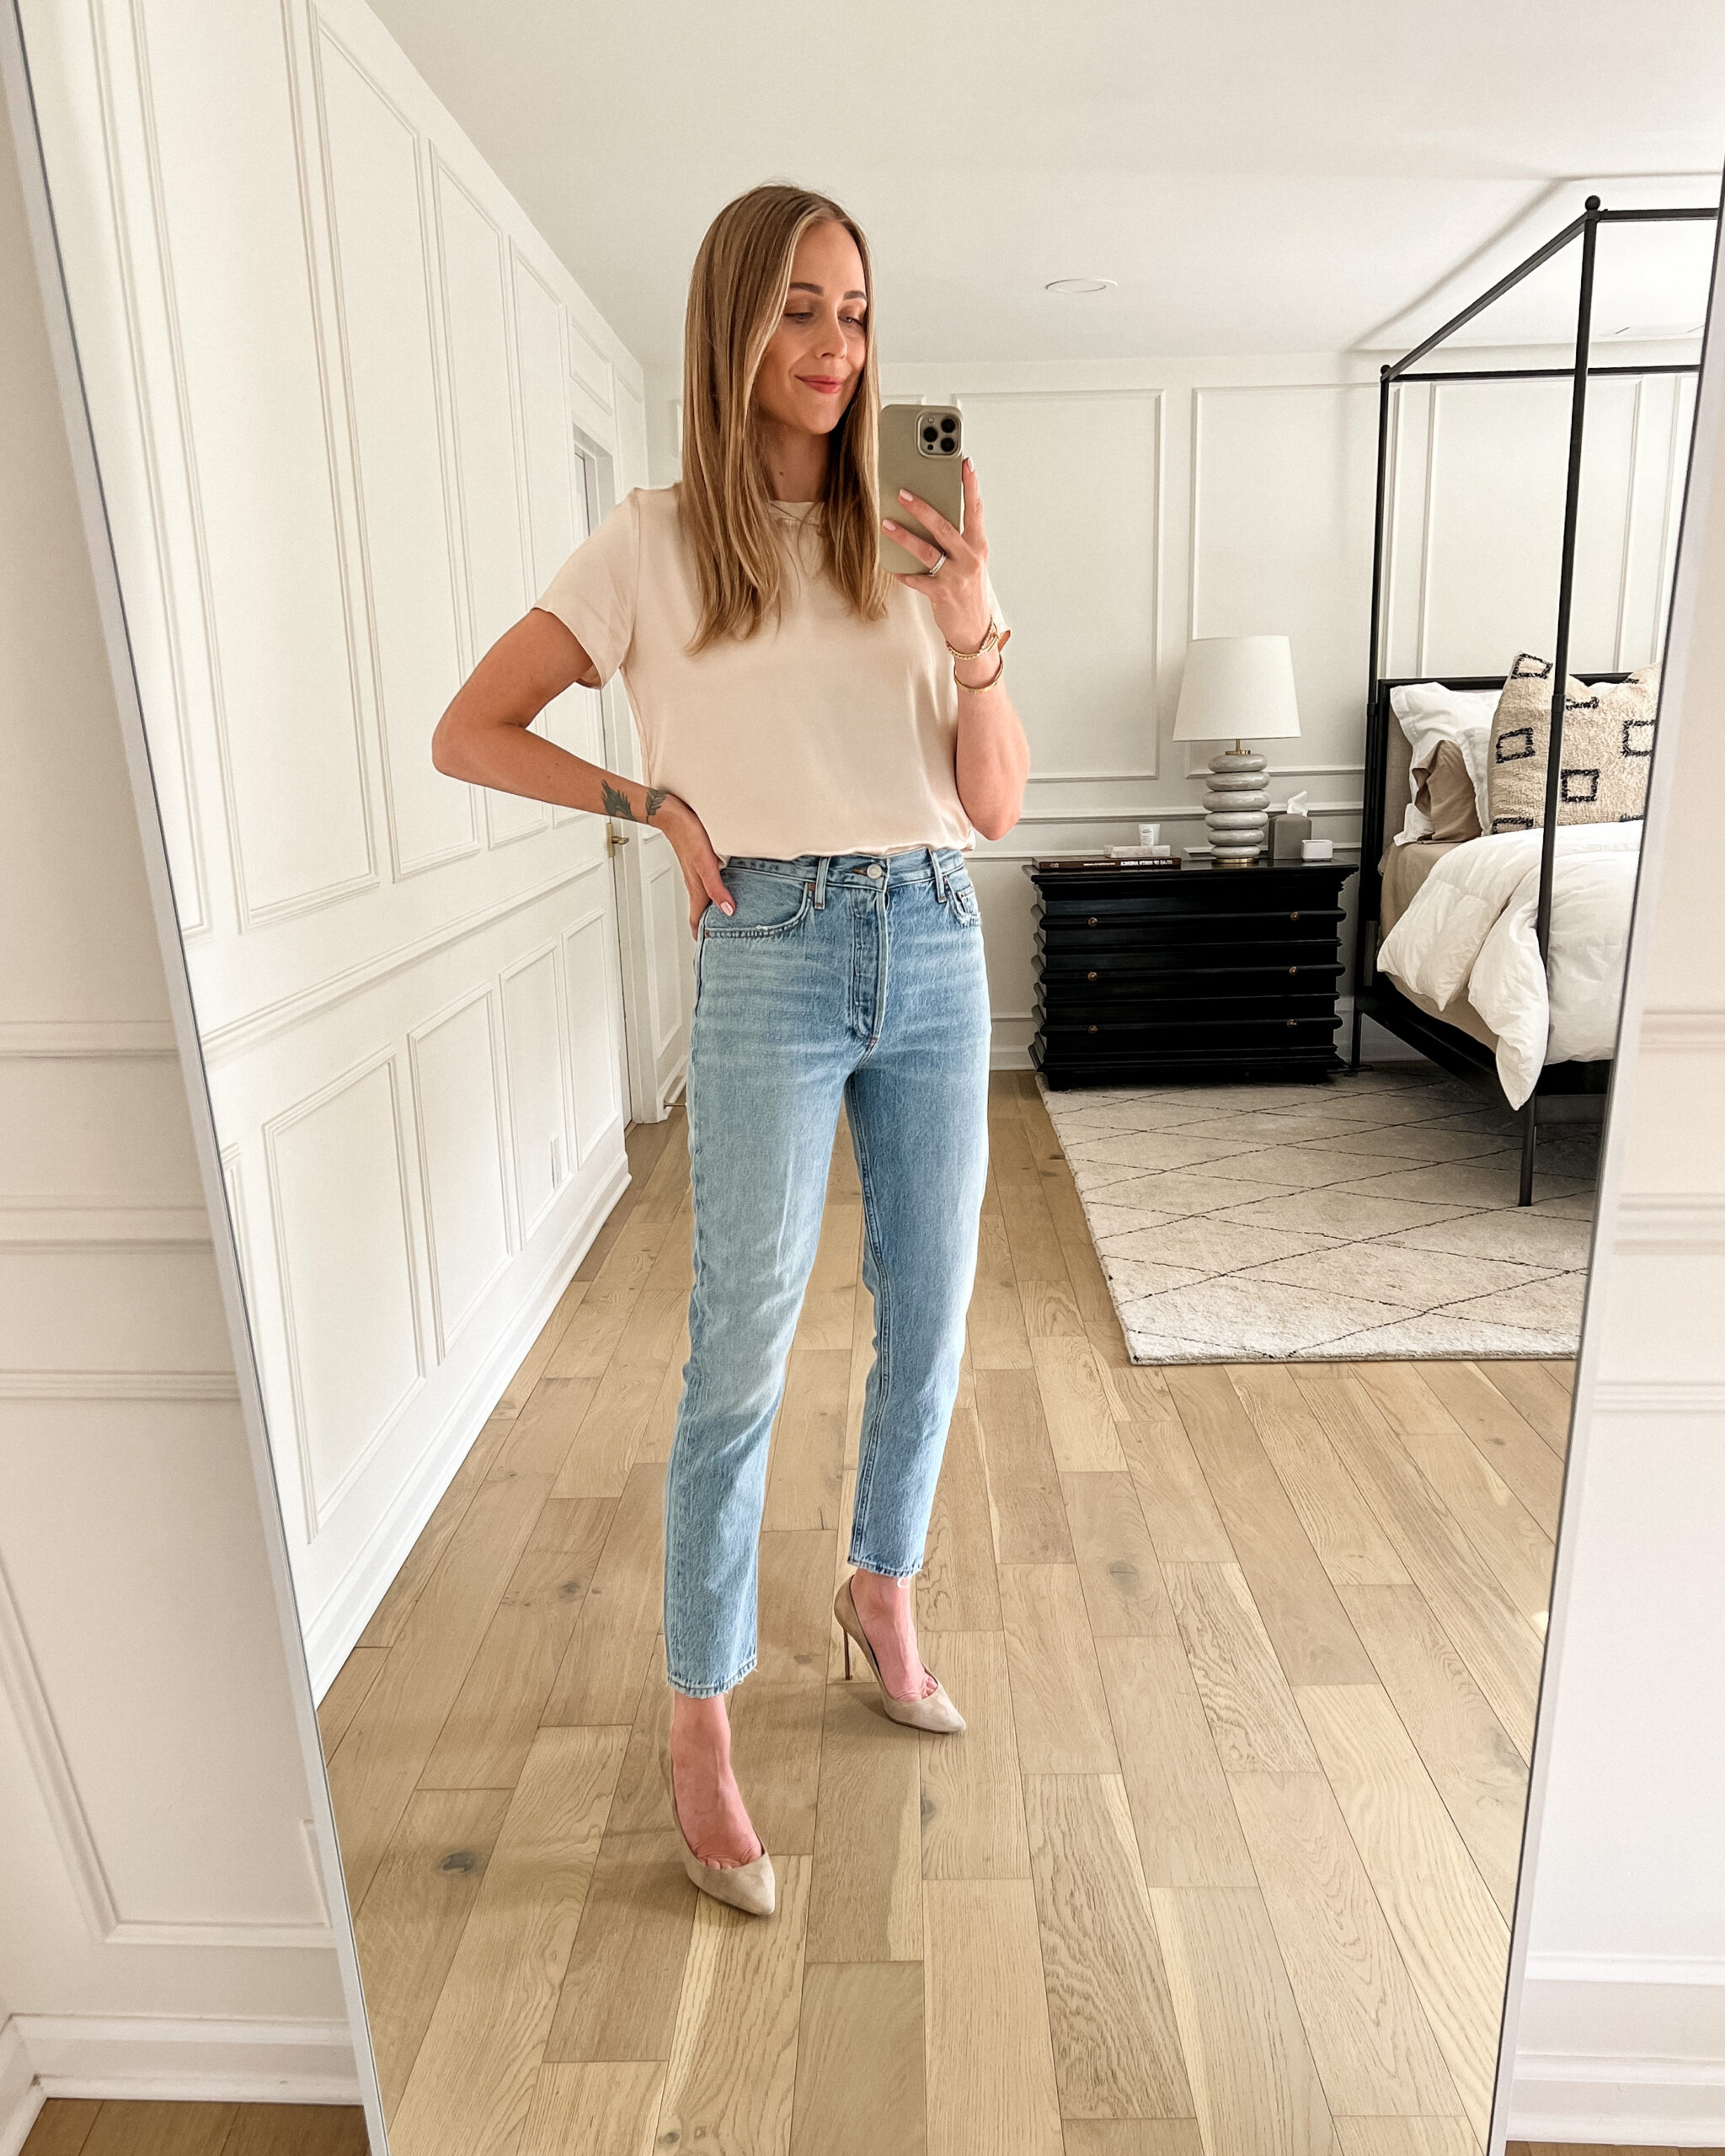 Fashion Jackson Wearing AGOLDE Fen High Rise Relaxed Tapered Jeans Nude Pumps Beige Top